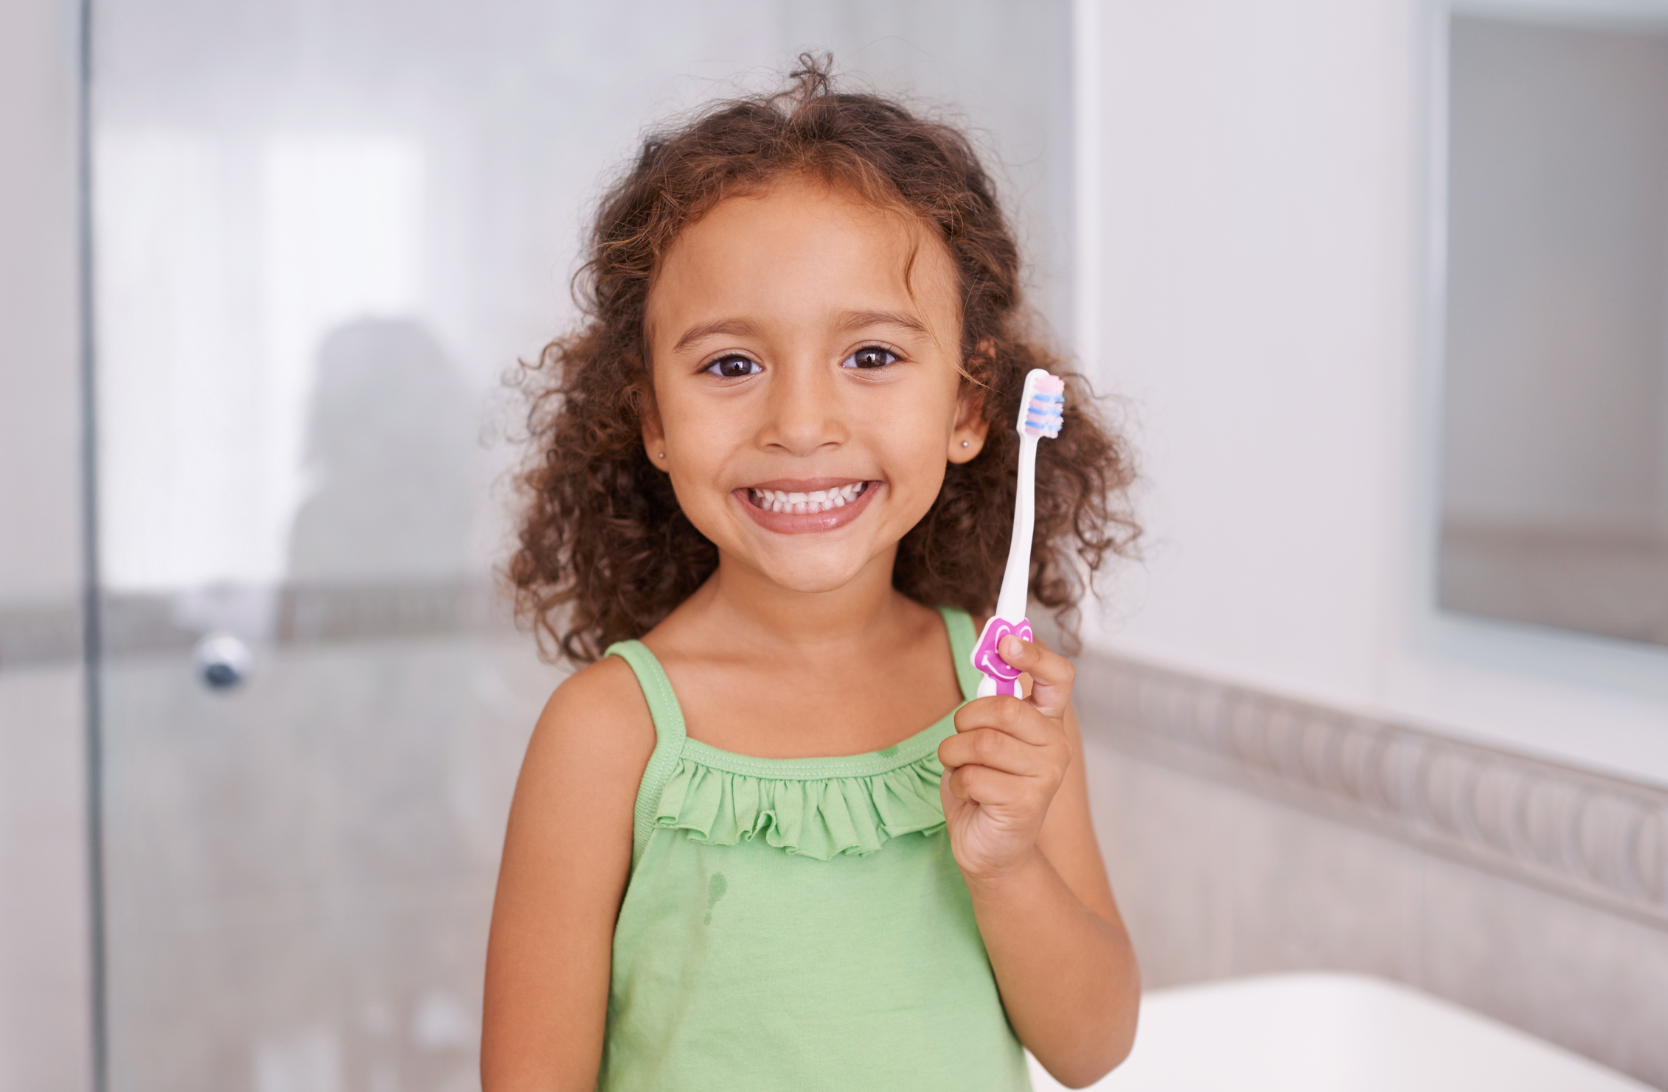 Picturing of young child with wide smile holding toothbrush